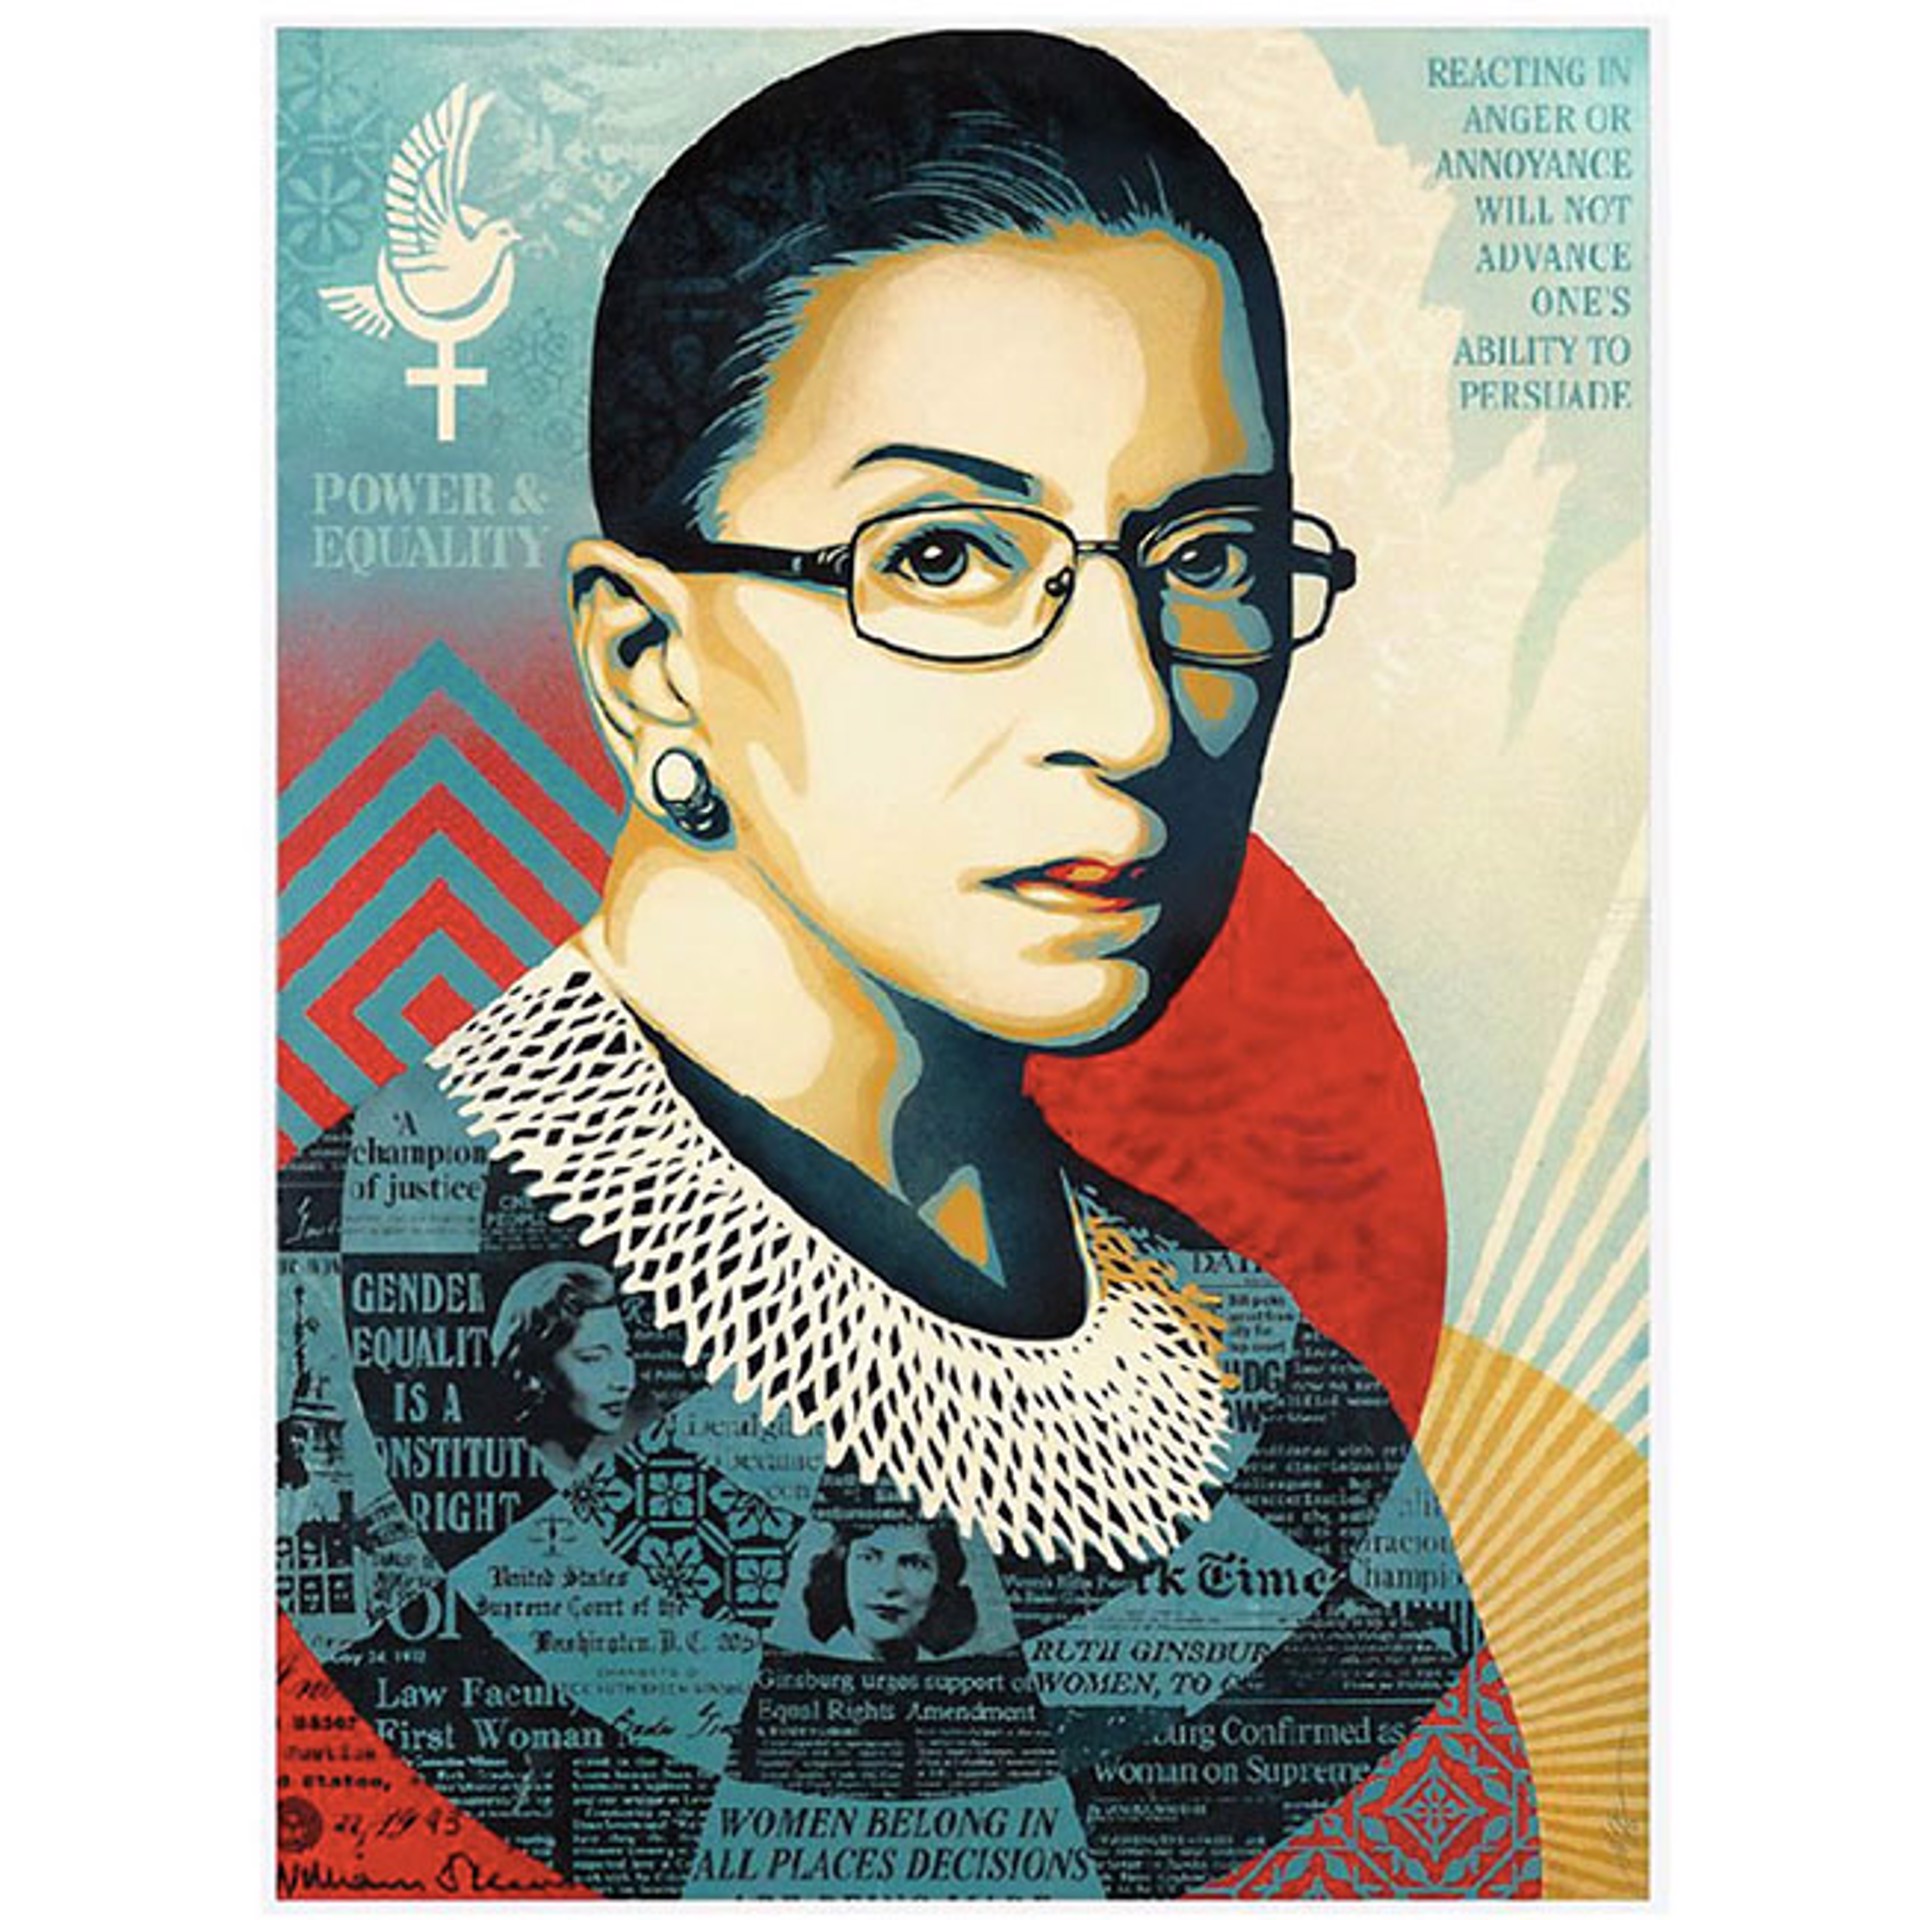 A Champion of Justice (Ruth Bader Ginsburg) Version 1 by Shepard Fairey